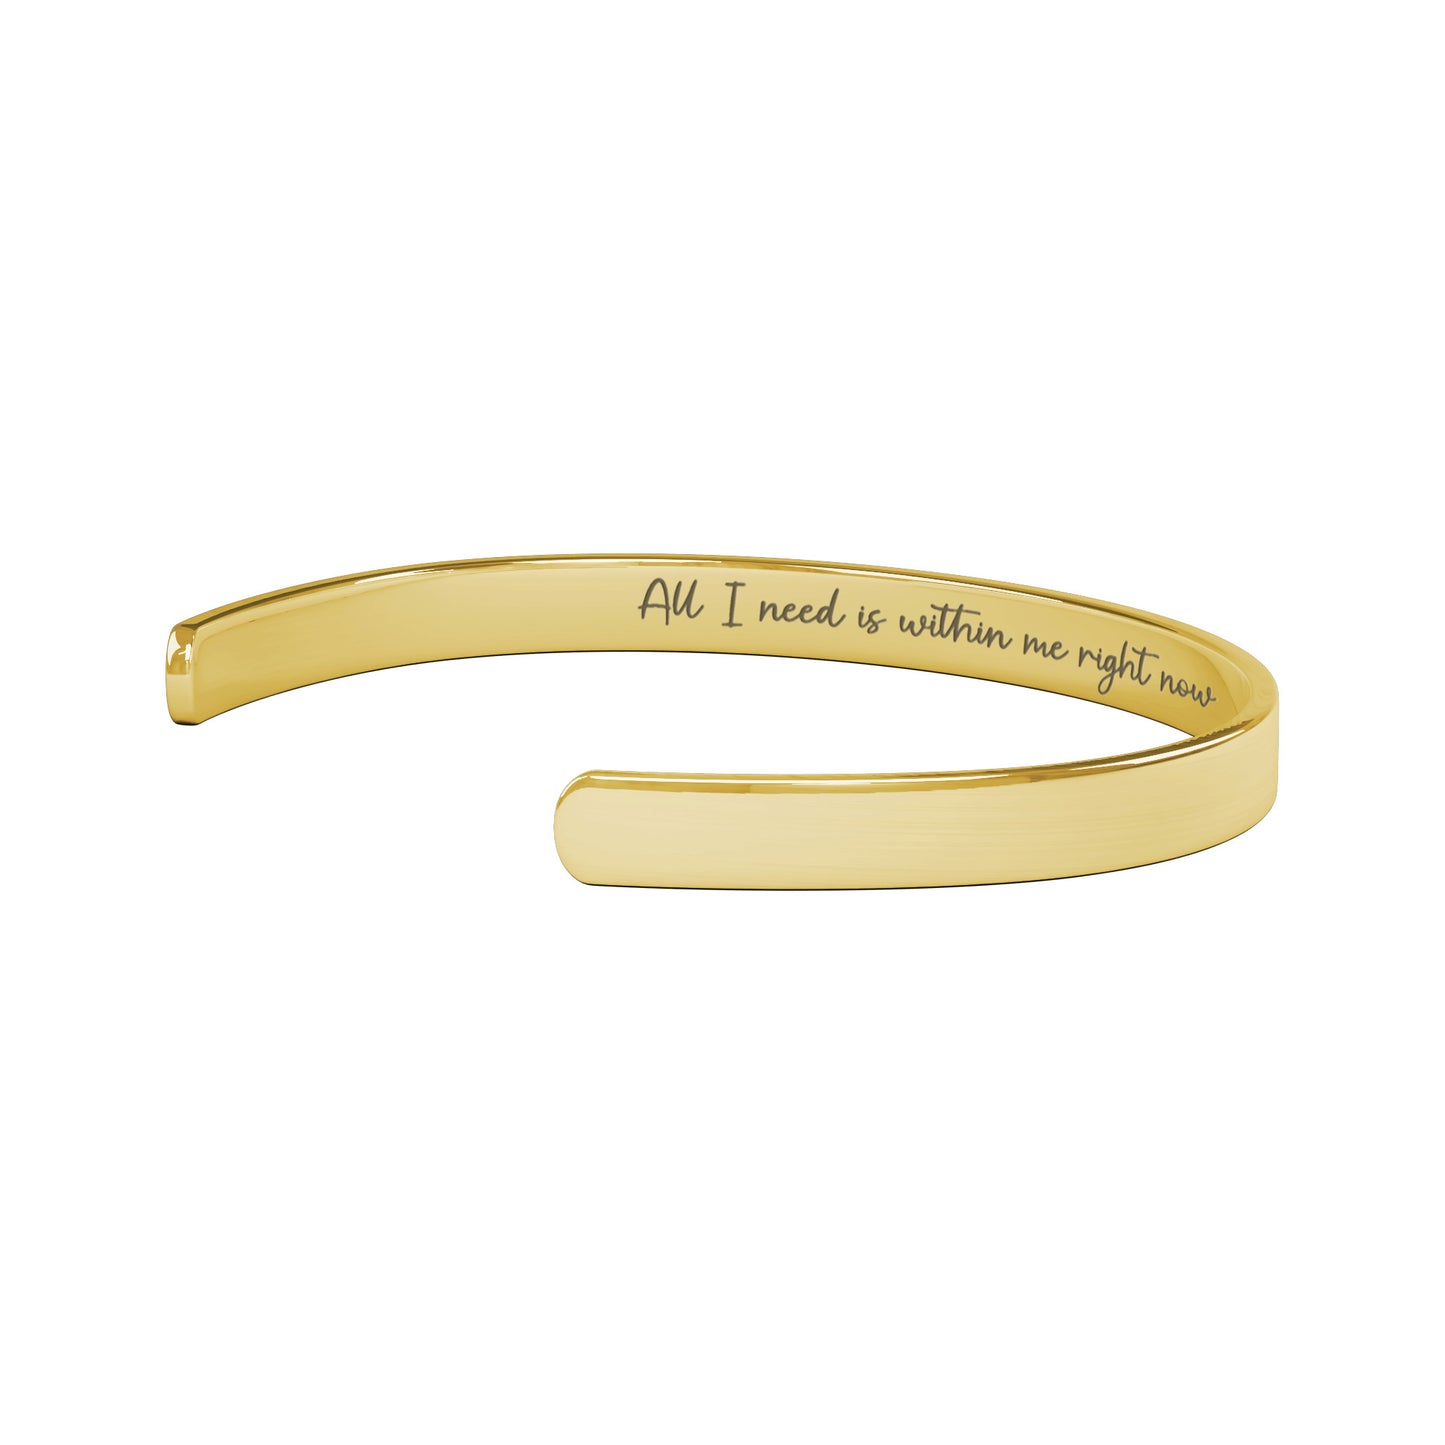 All I Need is Within Me Right Now Cuff Bracelet